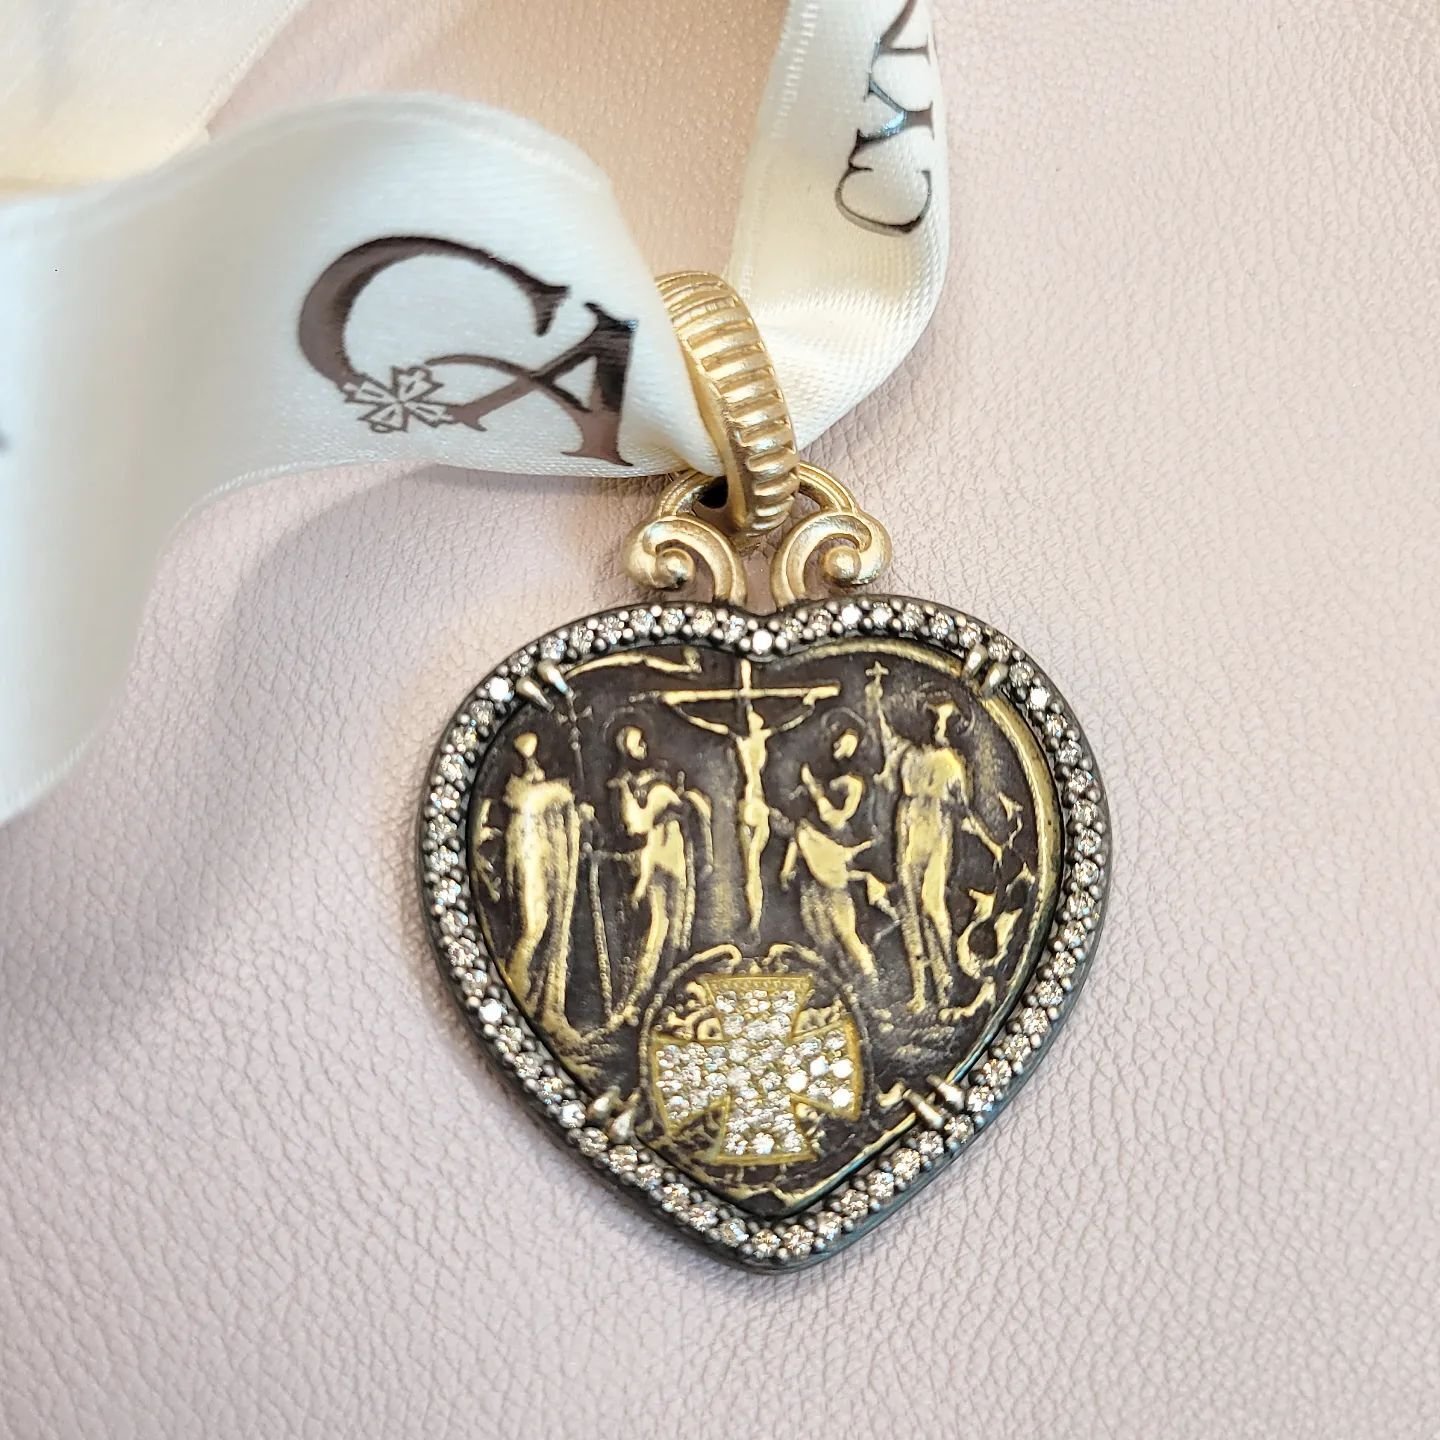 Antique Medal with Heart Shaped Star Crucifiction